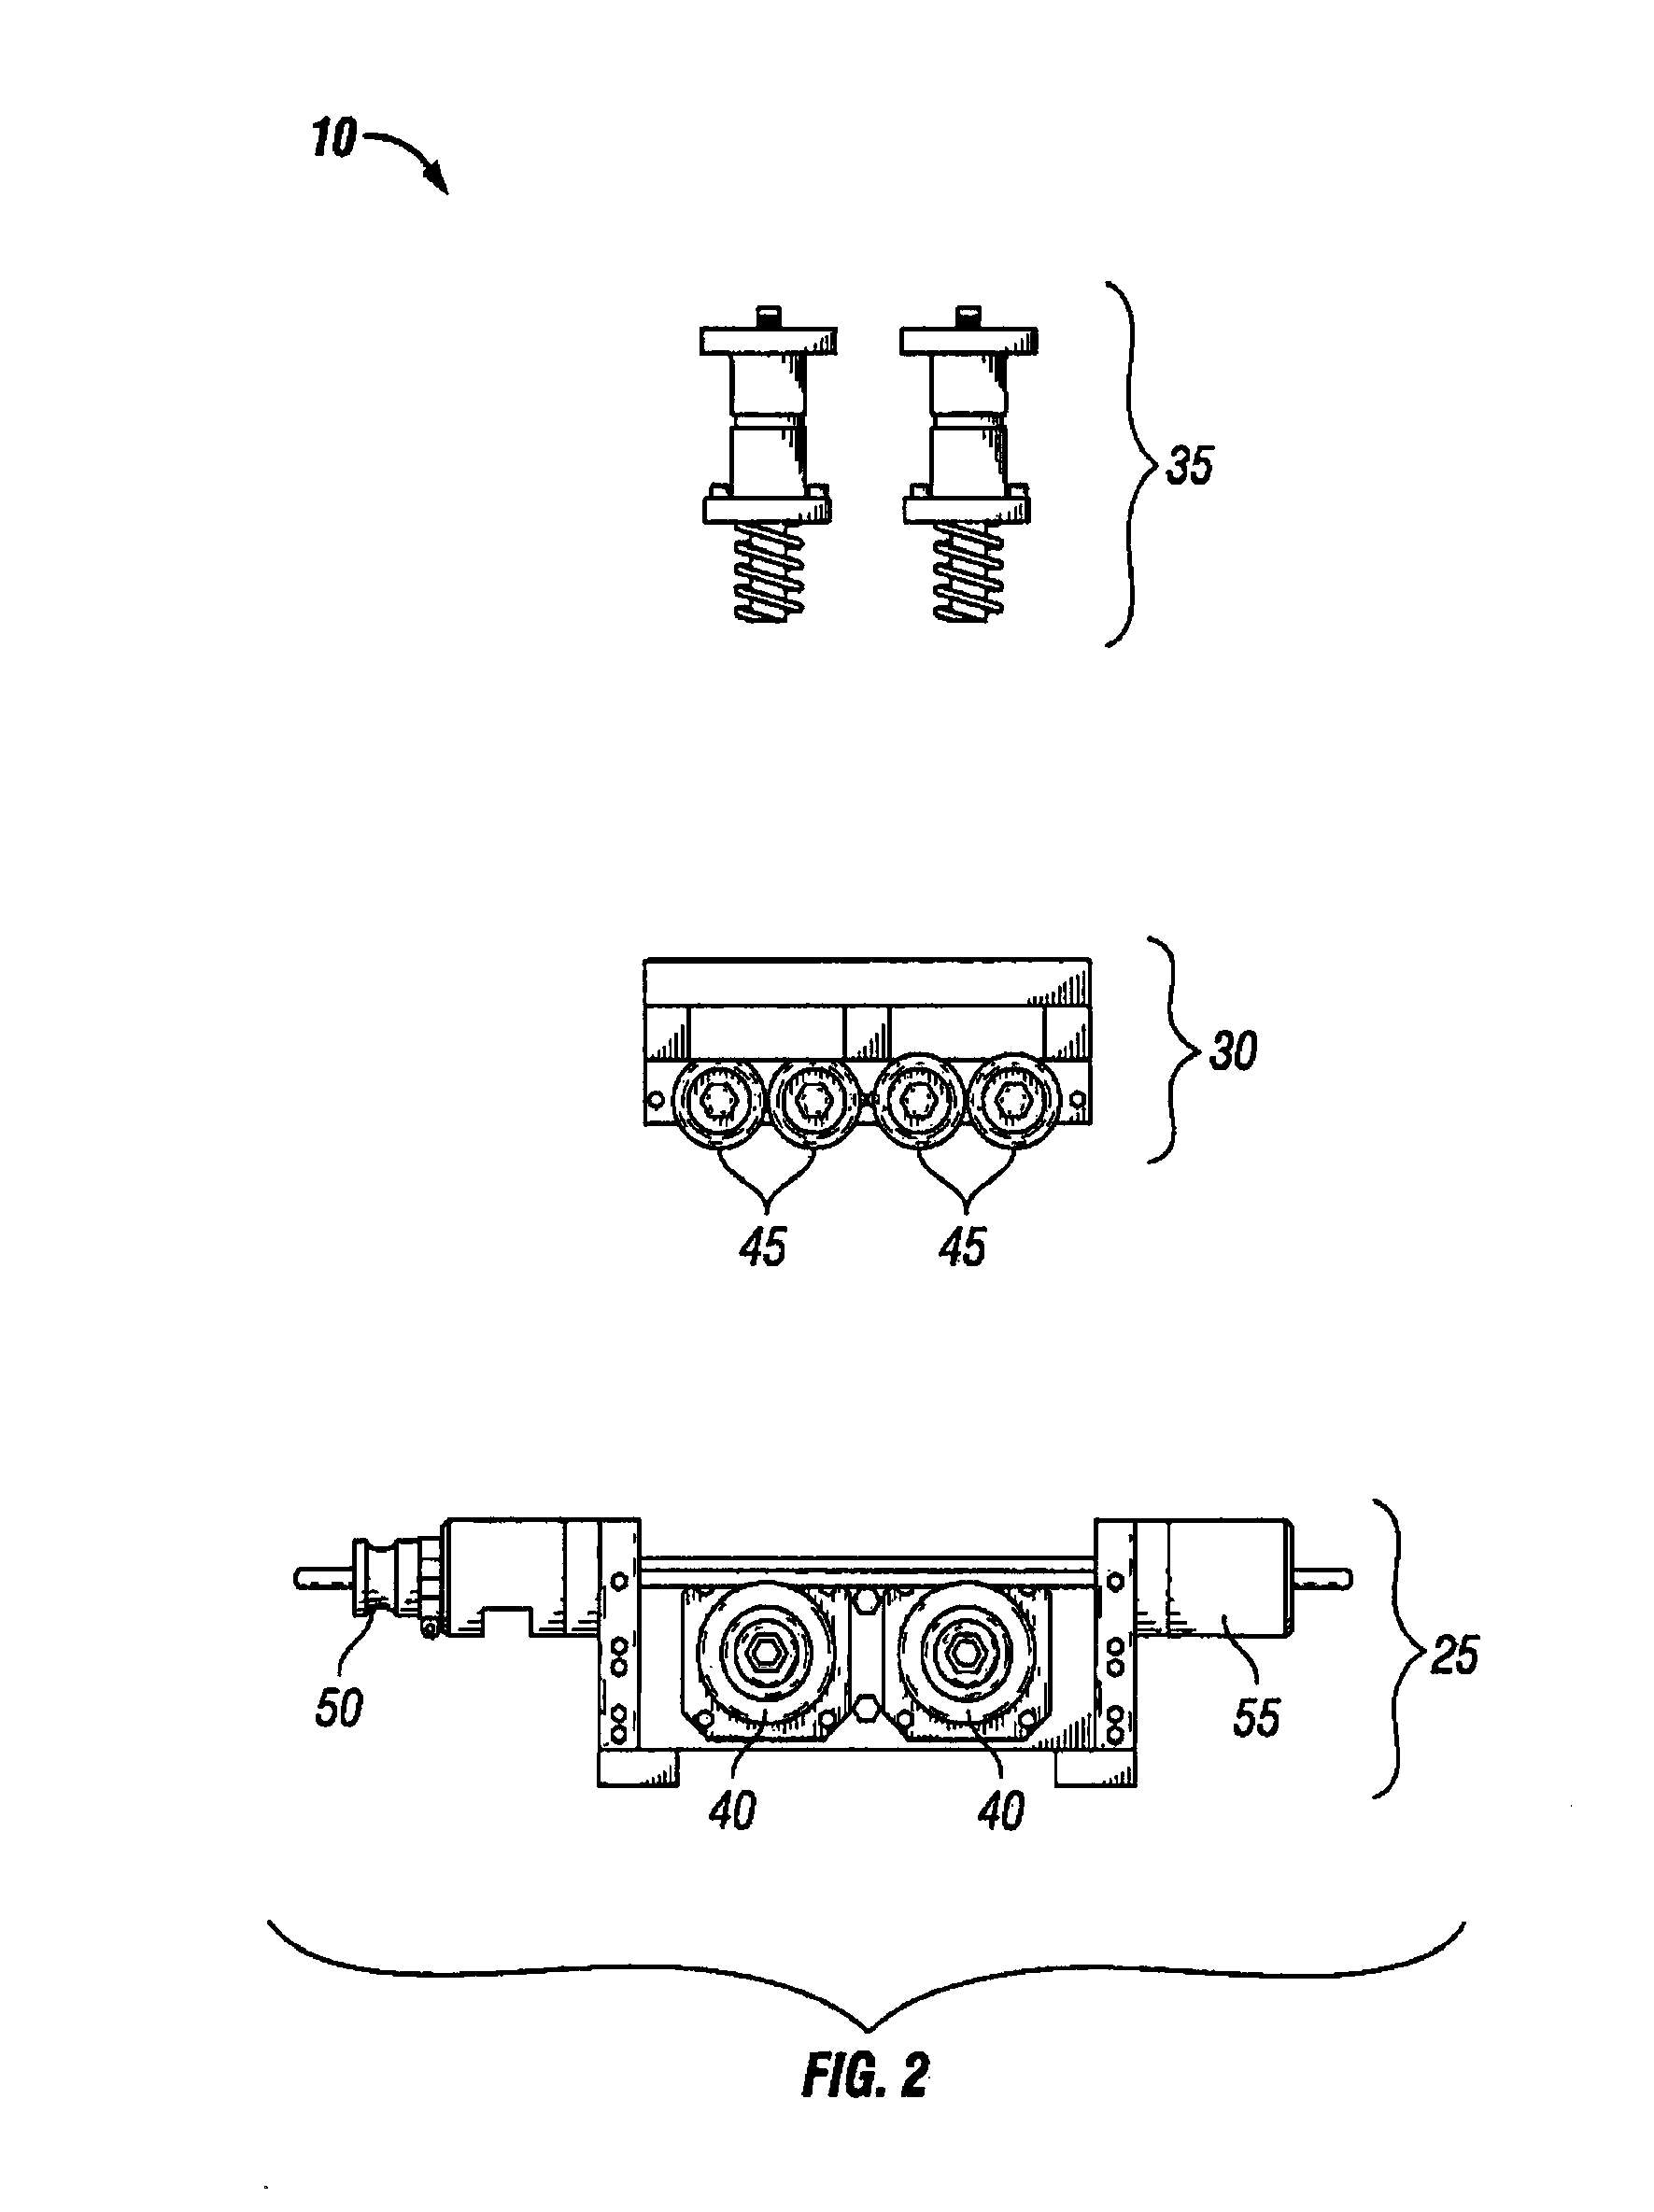 Driving apparatus for one or more cleaning lances